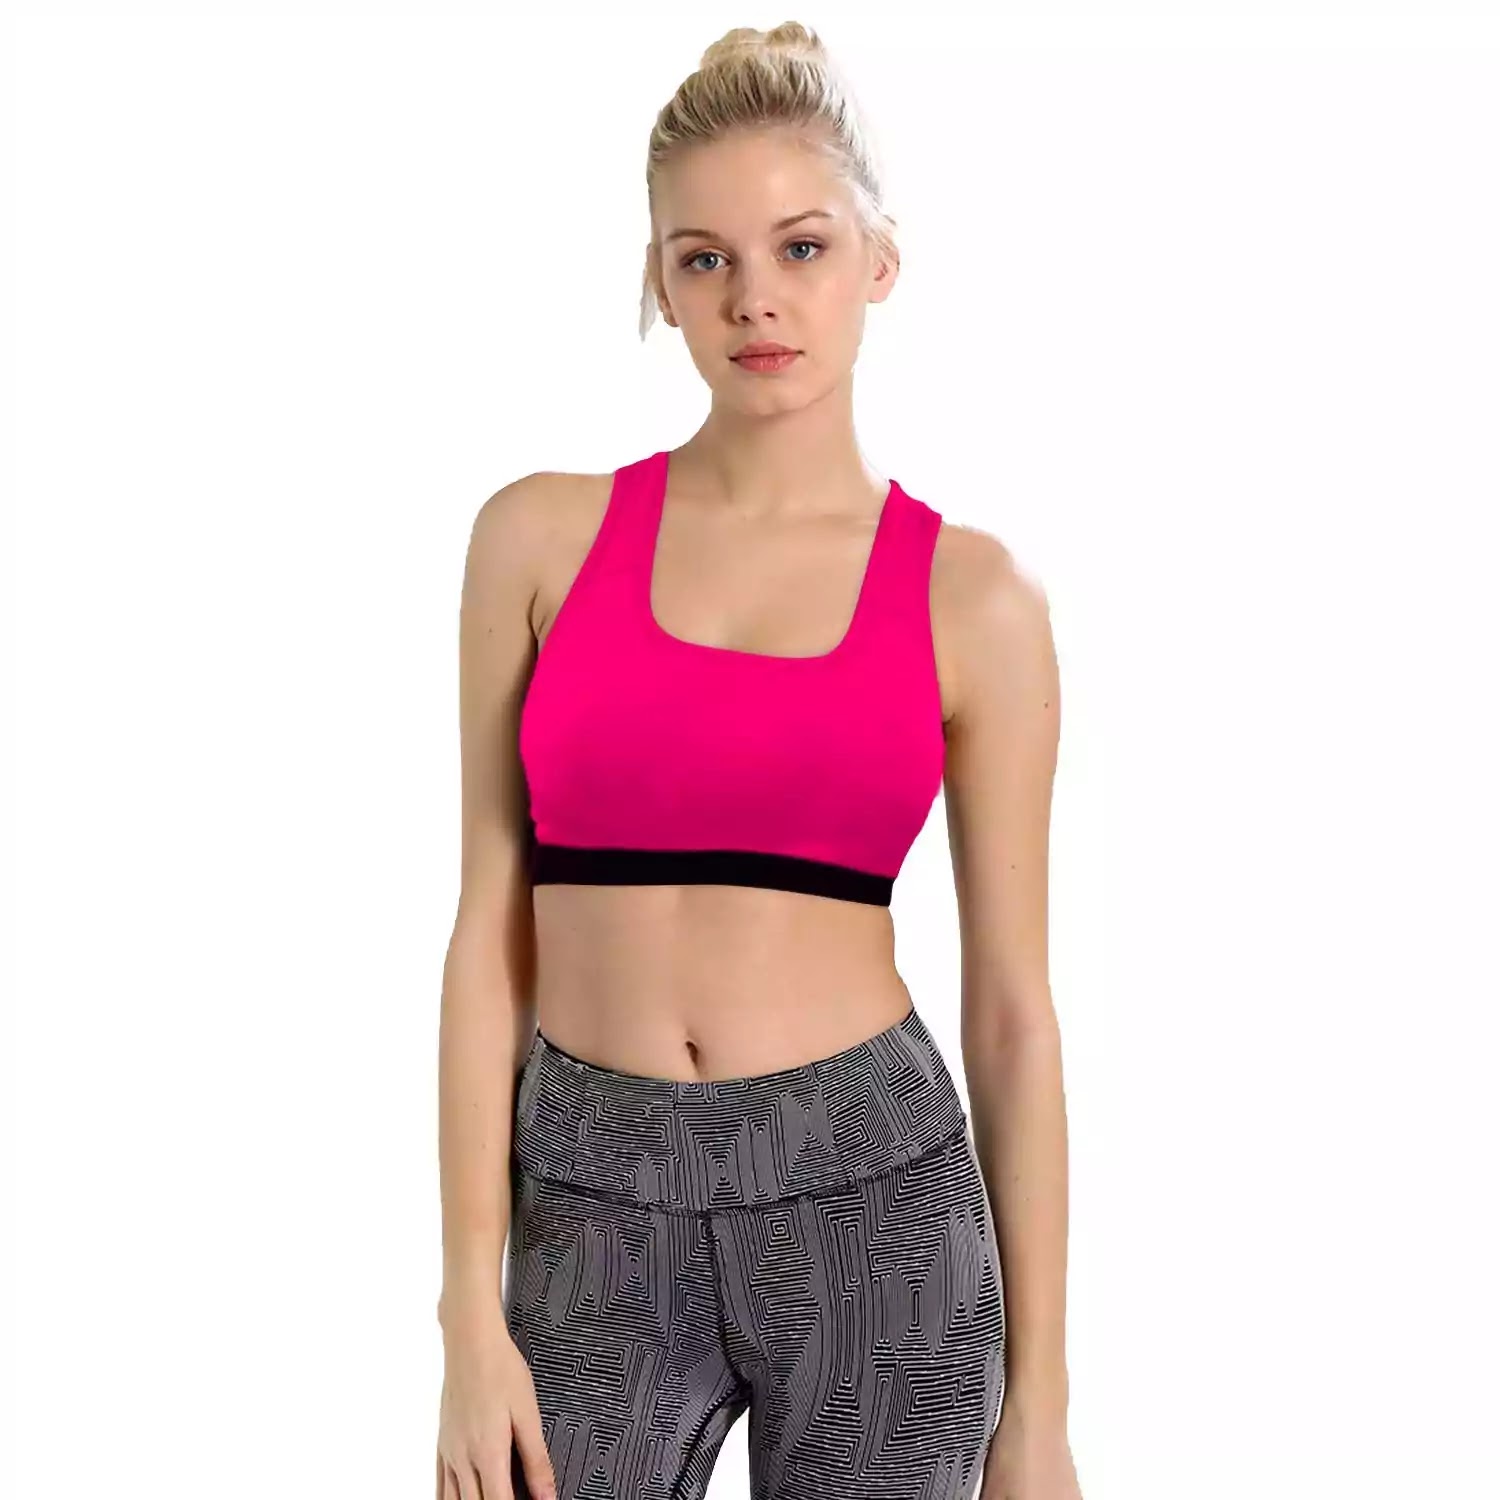 Women's Blended Non-Wired Sports Bra